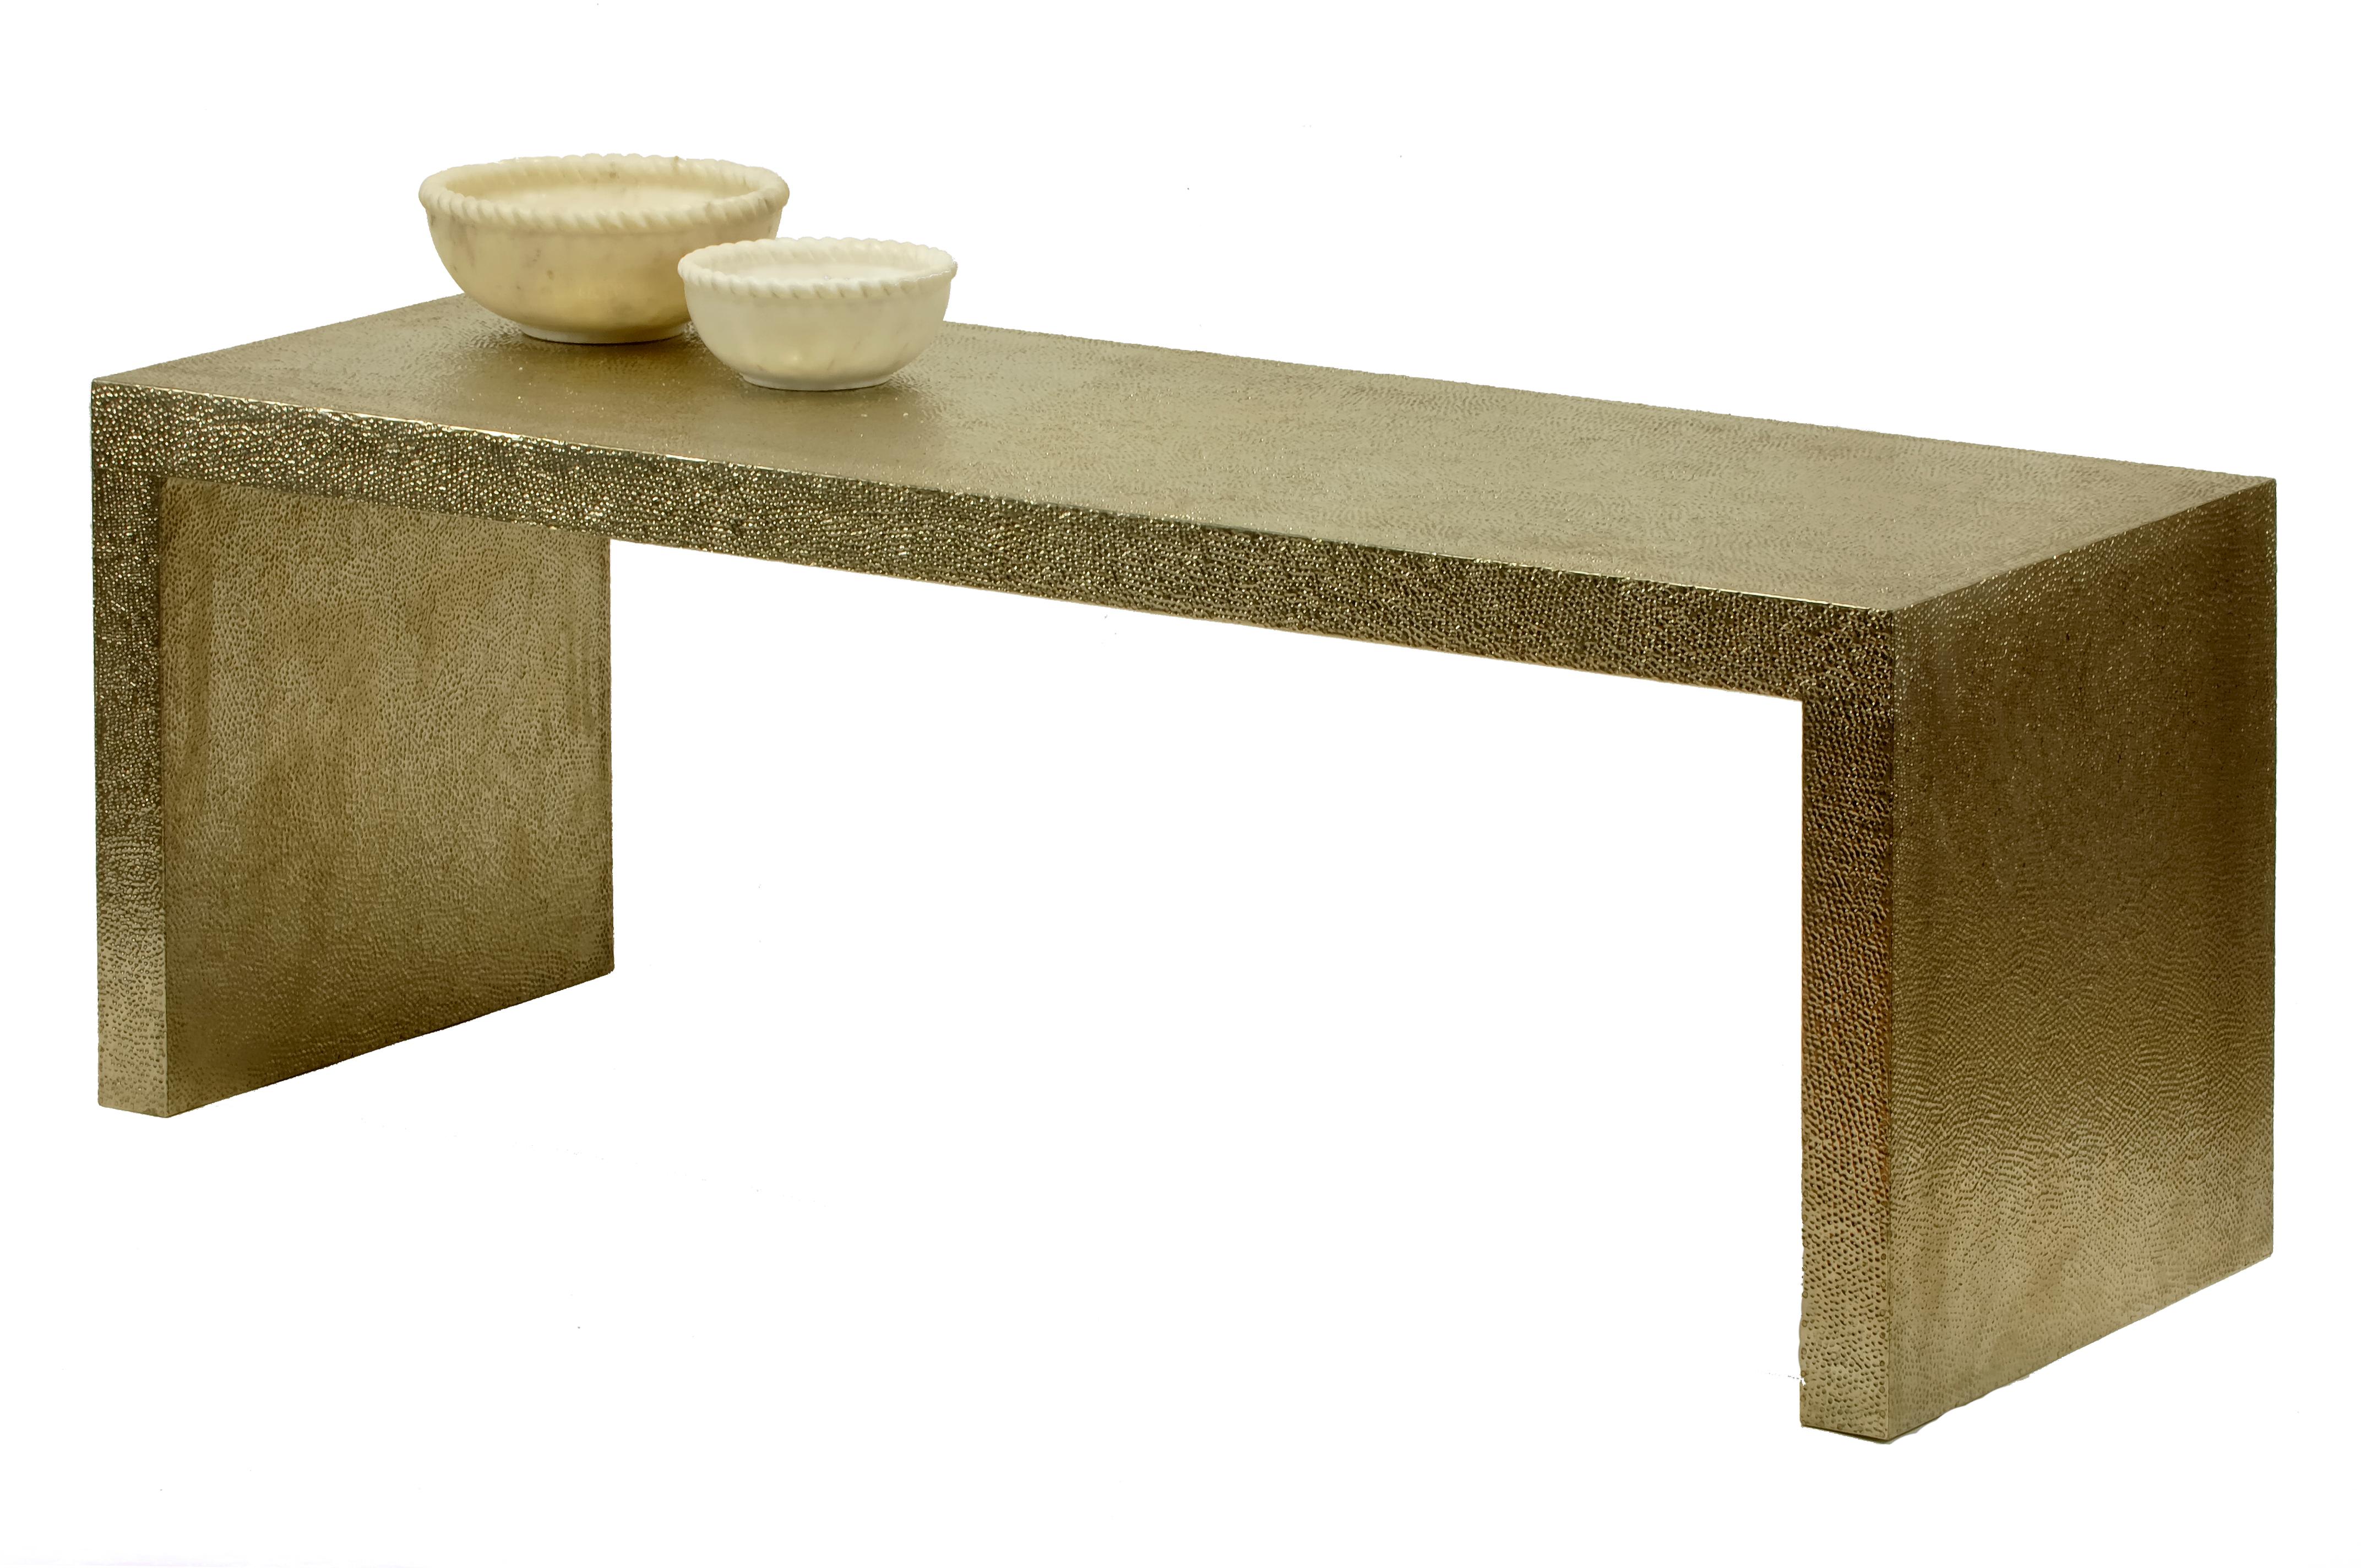 Hand-Carved Low Rectangular Table in White Bronze Clad Over MDF by Stephanie Odegard For Sale